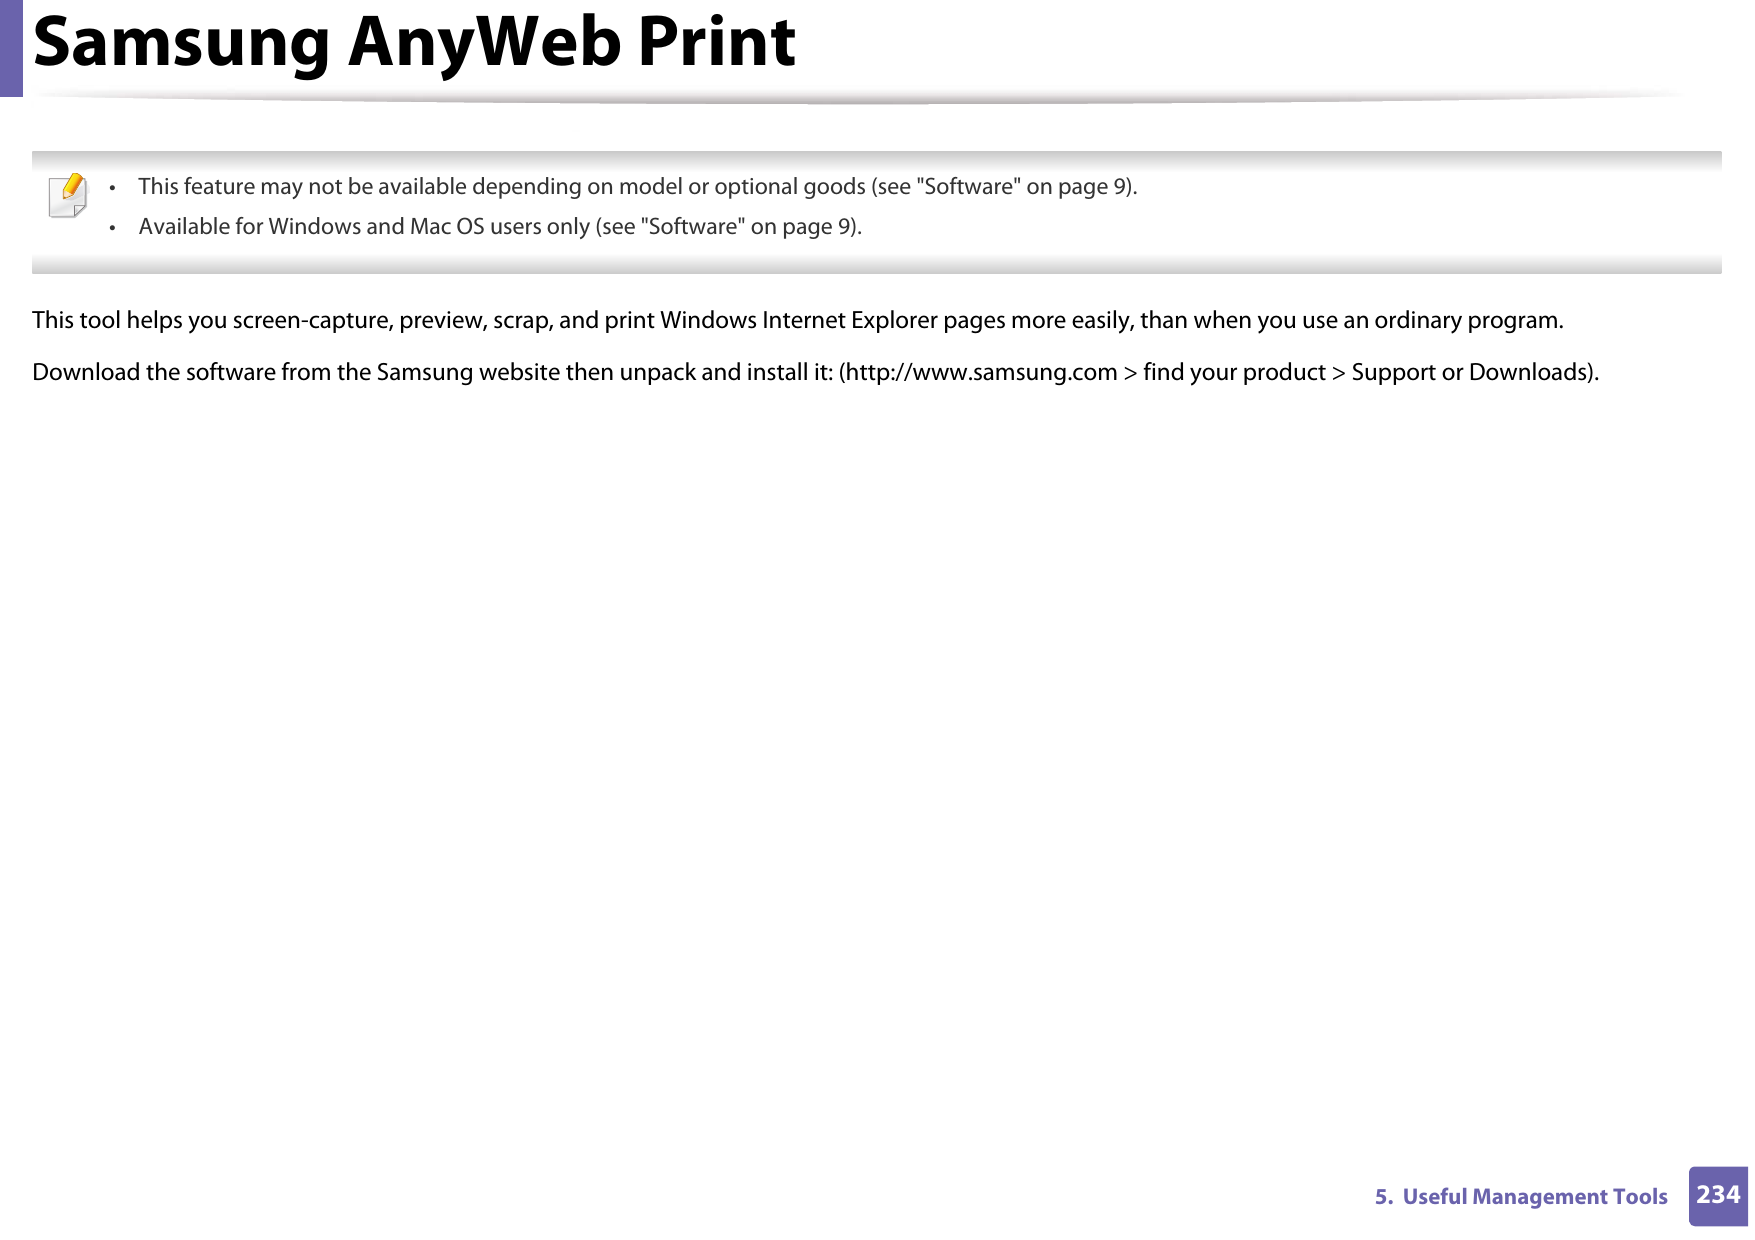 2345.  Useful Management ToolsSamsung AnyWeb Print • This feature may not be available depending on model or optional goods (see &quot;Software&quot; on page 9).• Available for Windows and Mac OS users only (see &quot;Software&quot; on page 9). This tool helps you screen-capture, preview, scrap, and print Windows Internet Explorer pages more easily, than when you use an ordinary program. Download the software from the Samsung website then unpack and install it: (http://www.samsung.com &gt; find your product &gt; Support or Downloads).